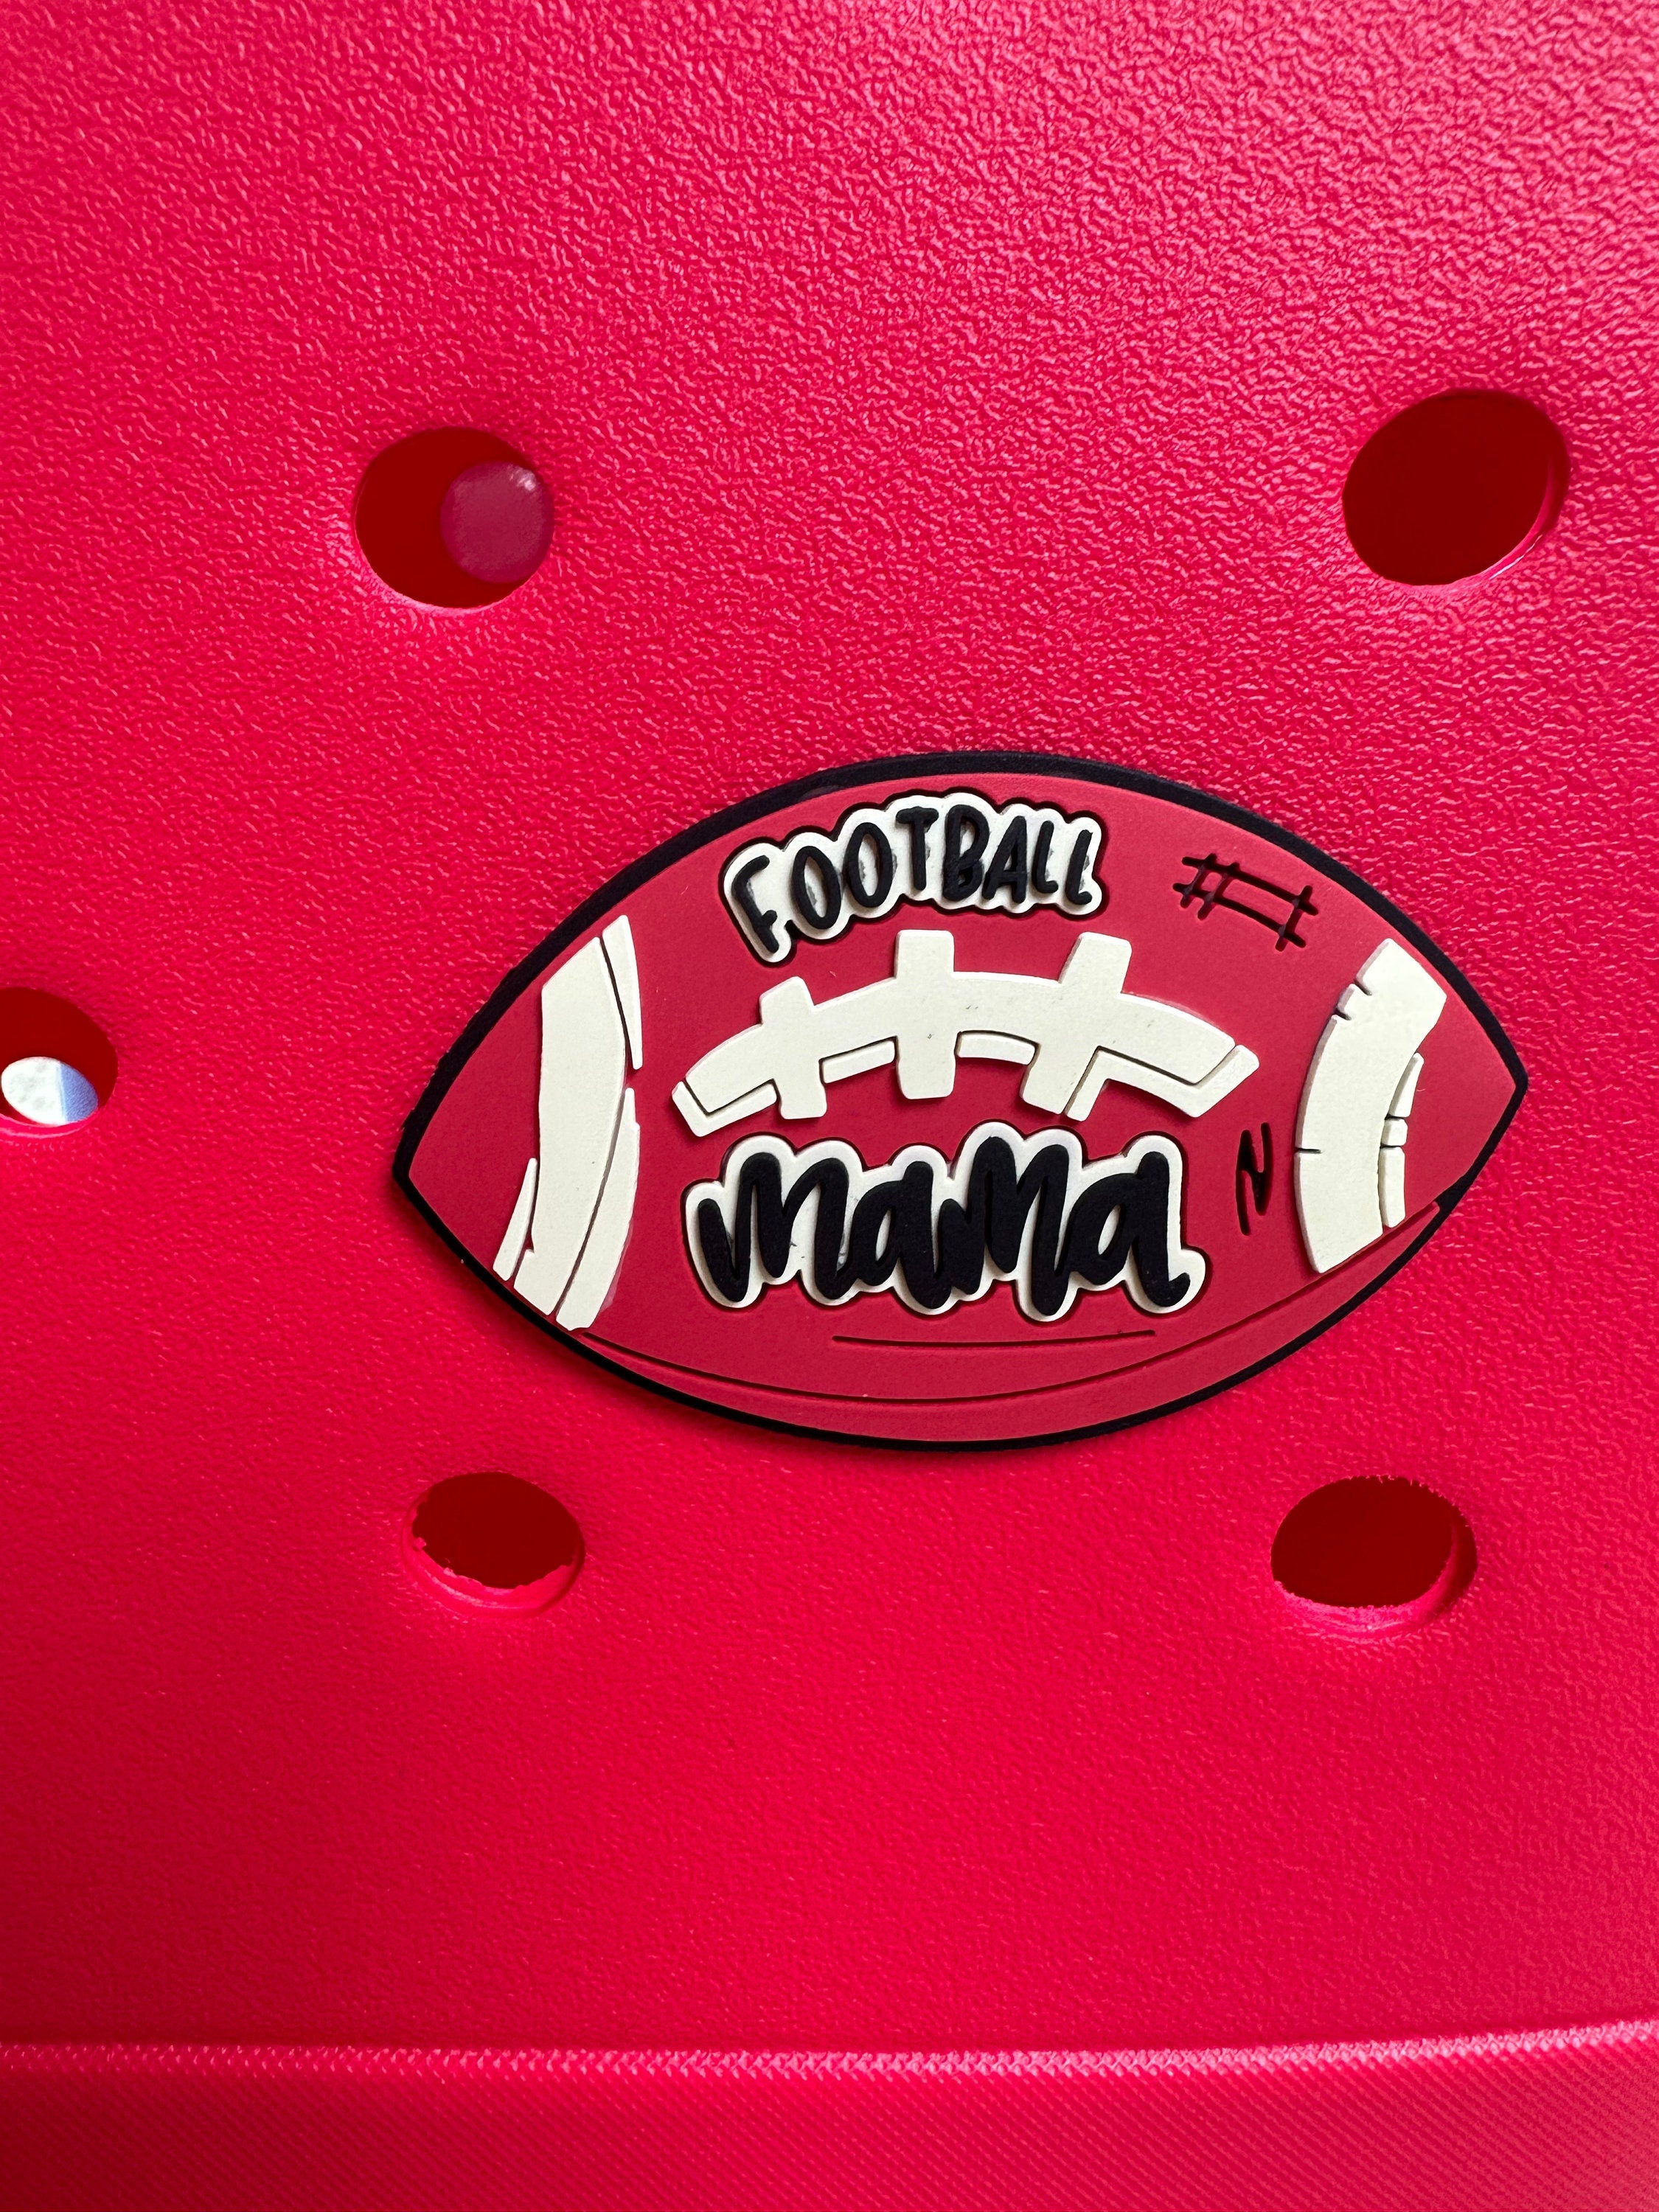 Bogg Bag Charms | Bogg Bits | Bogg Bag Accessories | Bogg Buttons | Bogg Bits | Simply Southern | Mom Life | Football Mom | Anchor